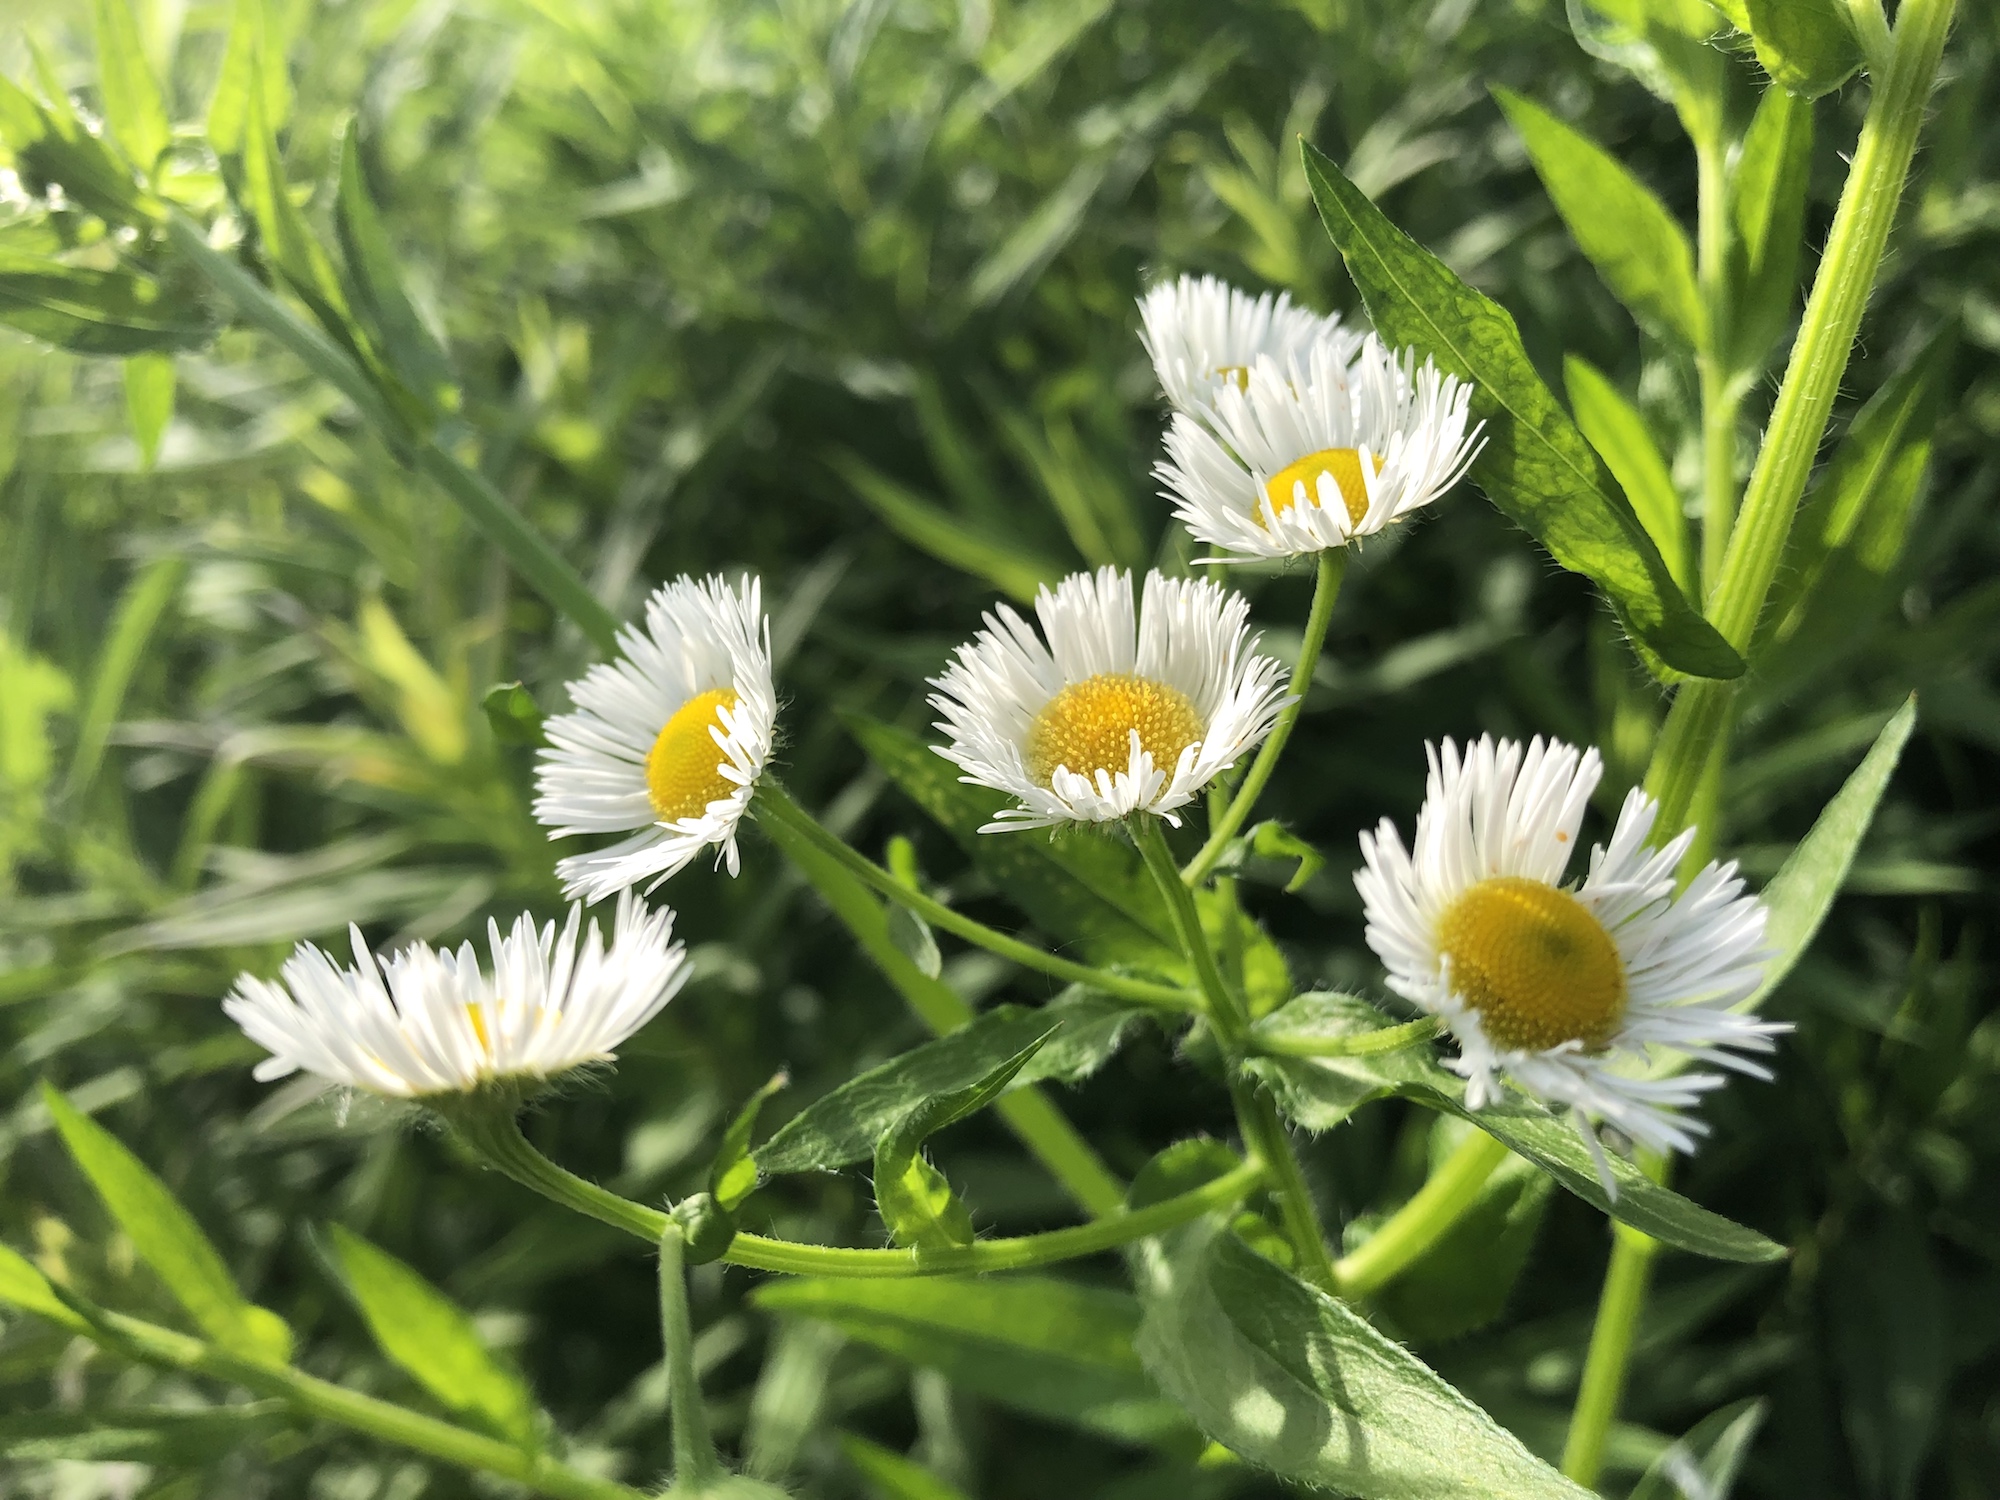 Fleabane on bank of retaining pond at the corner of Manitou Way and Nakoma Road in Madison, Wisconsin on June 26, 2019.